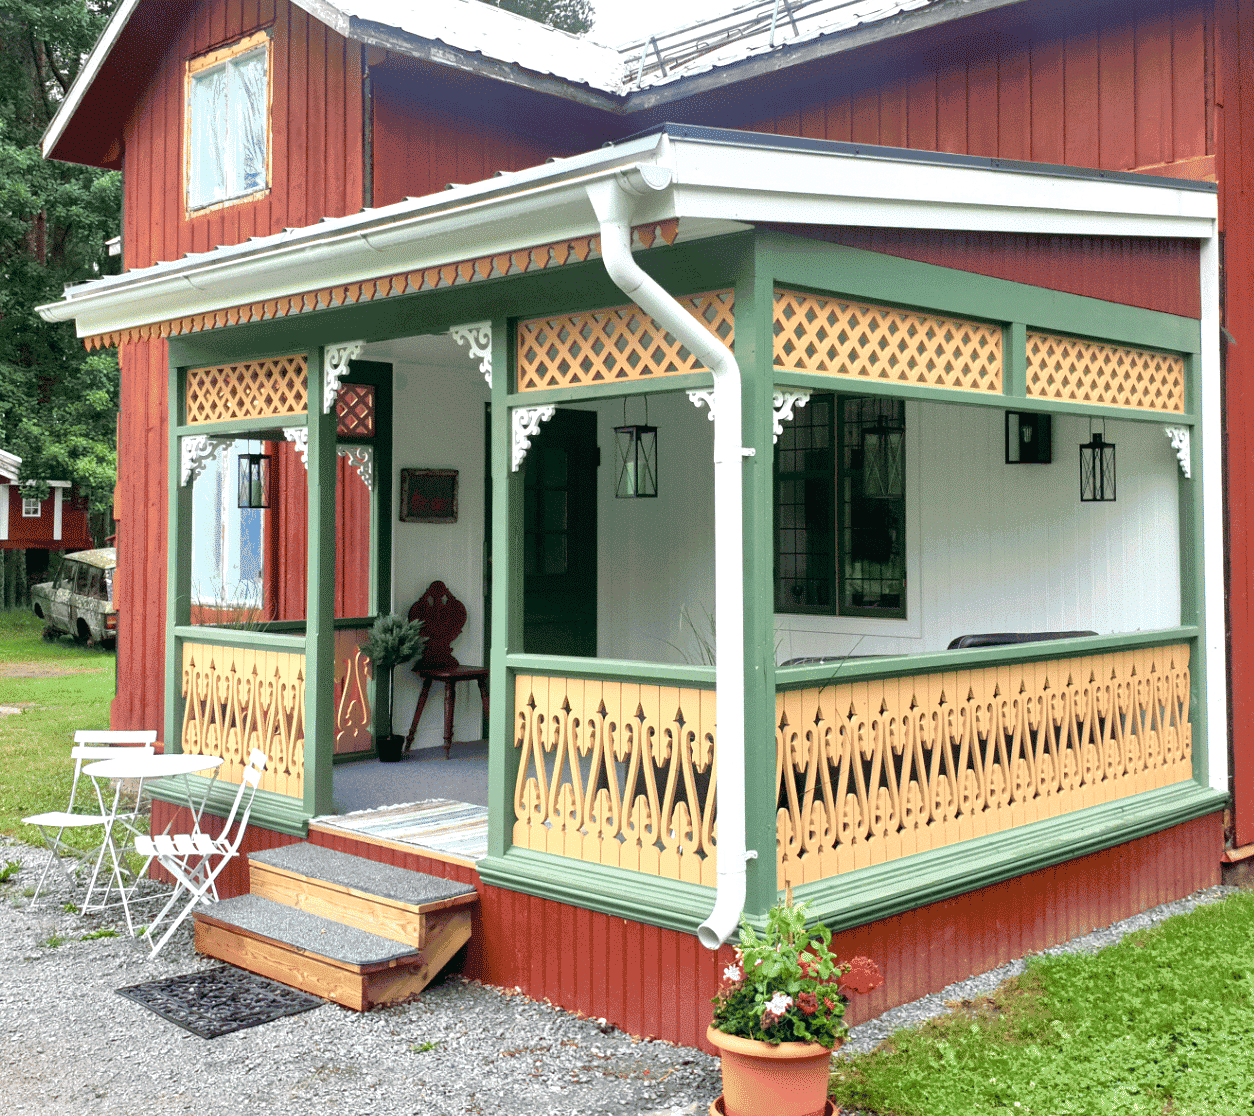 A red Swedish house with traditional balusters and decorative brackets.